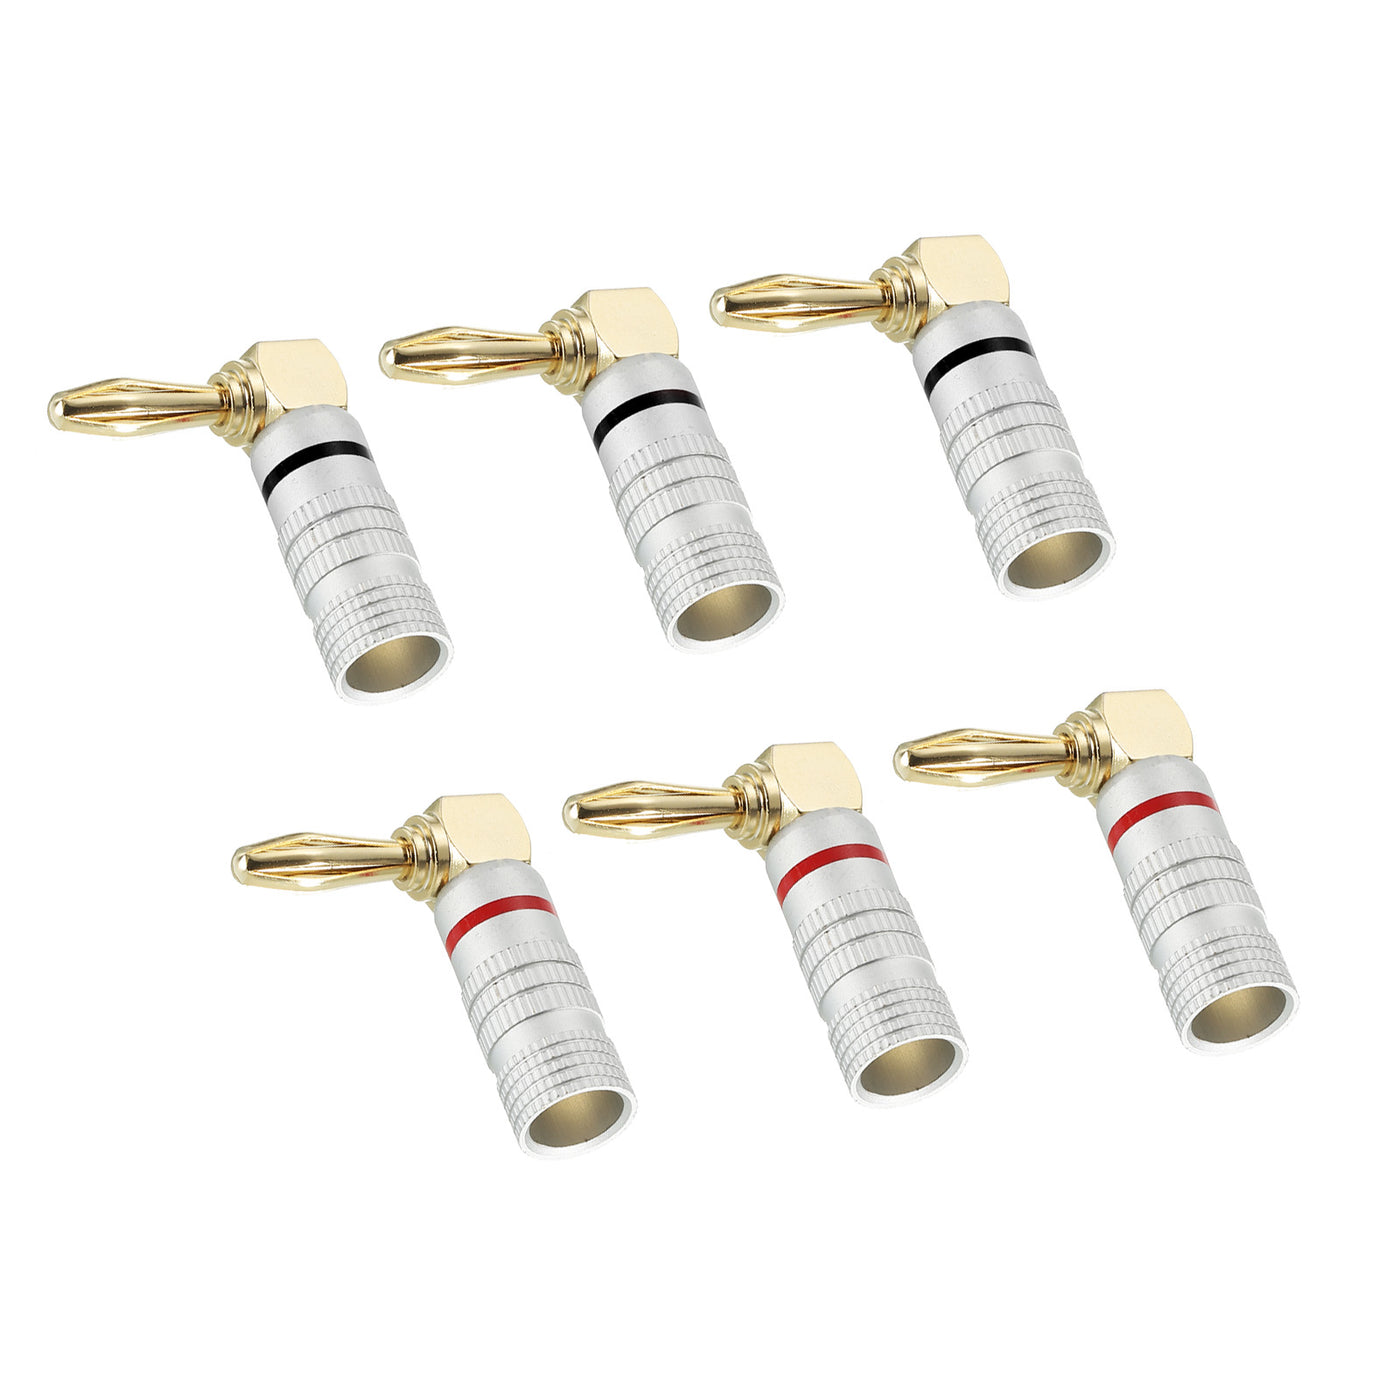 Harfington Banana Plugs 90 Degree Speaker Banana Plugs Closed Screw Type 4mm Gold-Plated Copper Red Black for Speaker Wires, Sound Systems Pack of 6